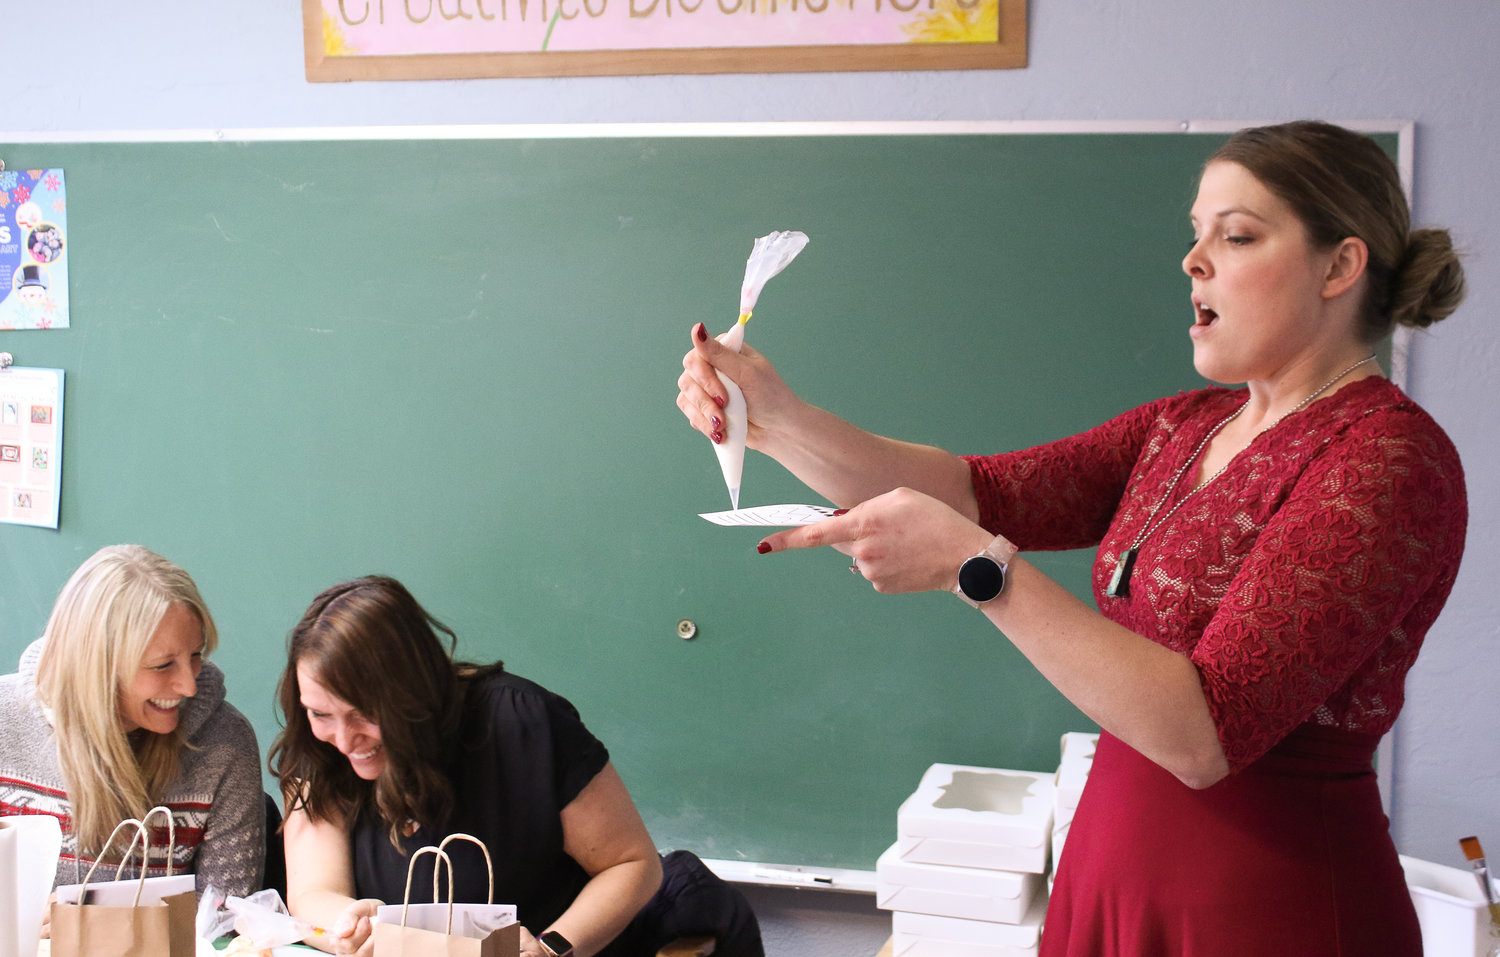 Instructor Anna Martin, owner of Anna's Bakery, demostrates proper pipping bag techniques when decorating sugar cookies with royal icing during a class she hosted at the Dandelion Creative Space on Sunday morning.